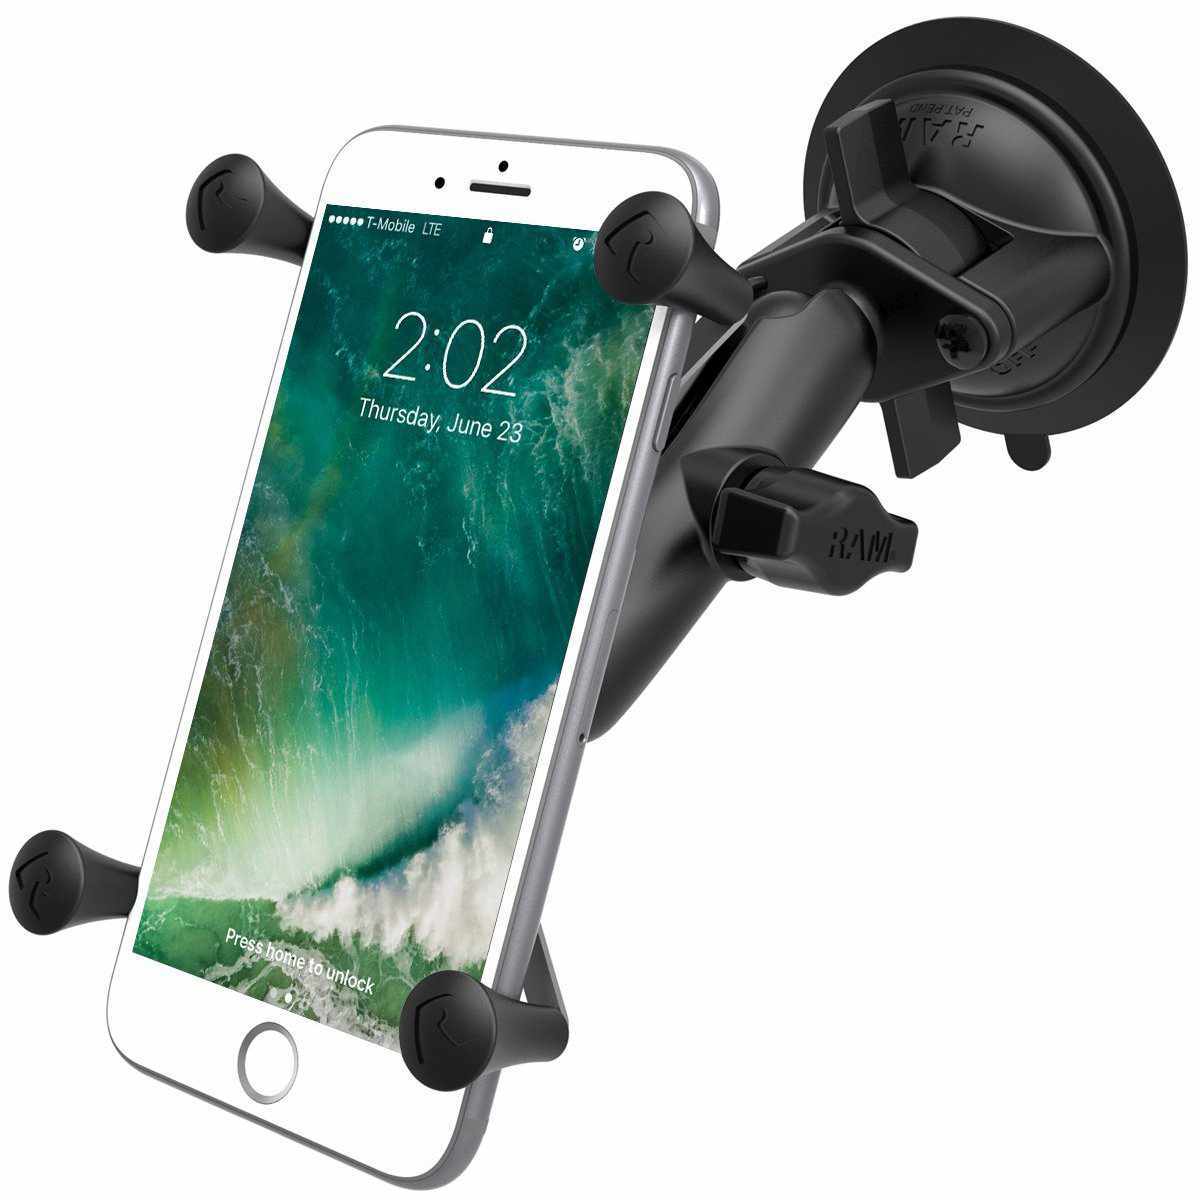  RAM MOUNTS Twist-Lock Composite Suction Cup Base with Ball RAP-B-224-1U  with B Size 1 Ball : Electronics